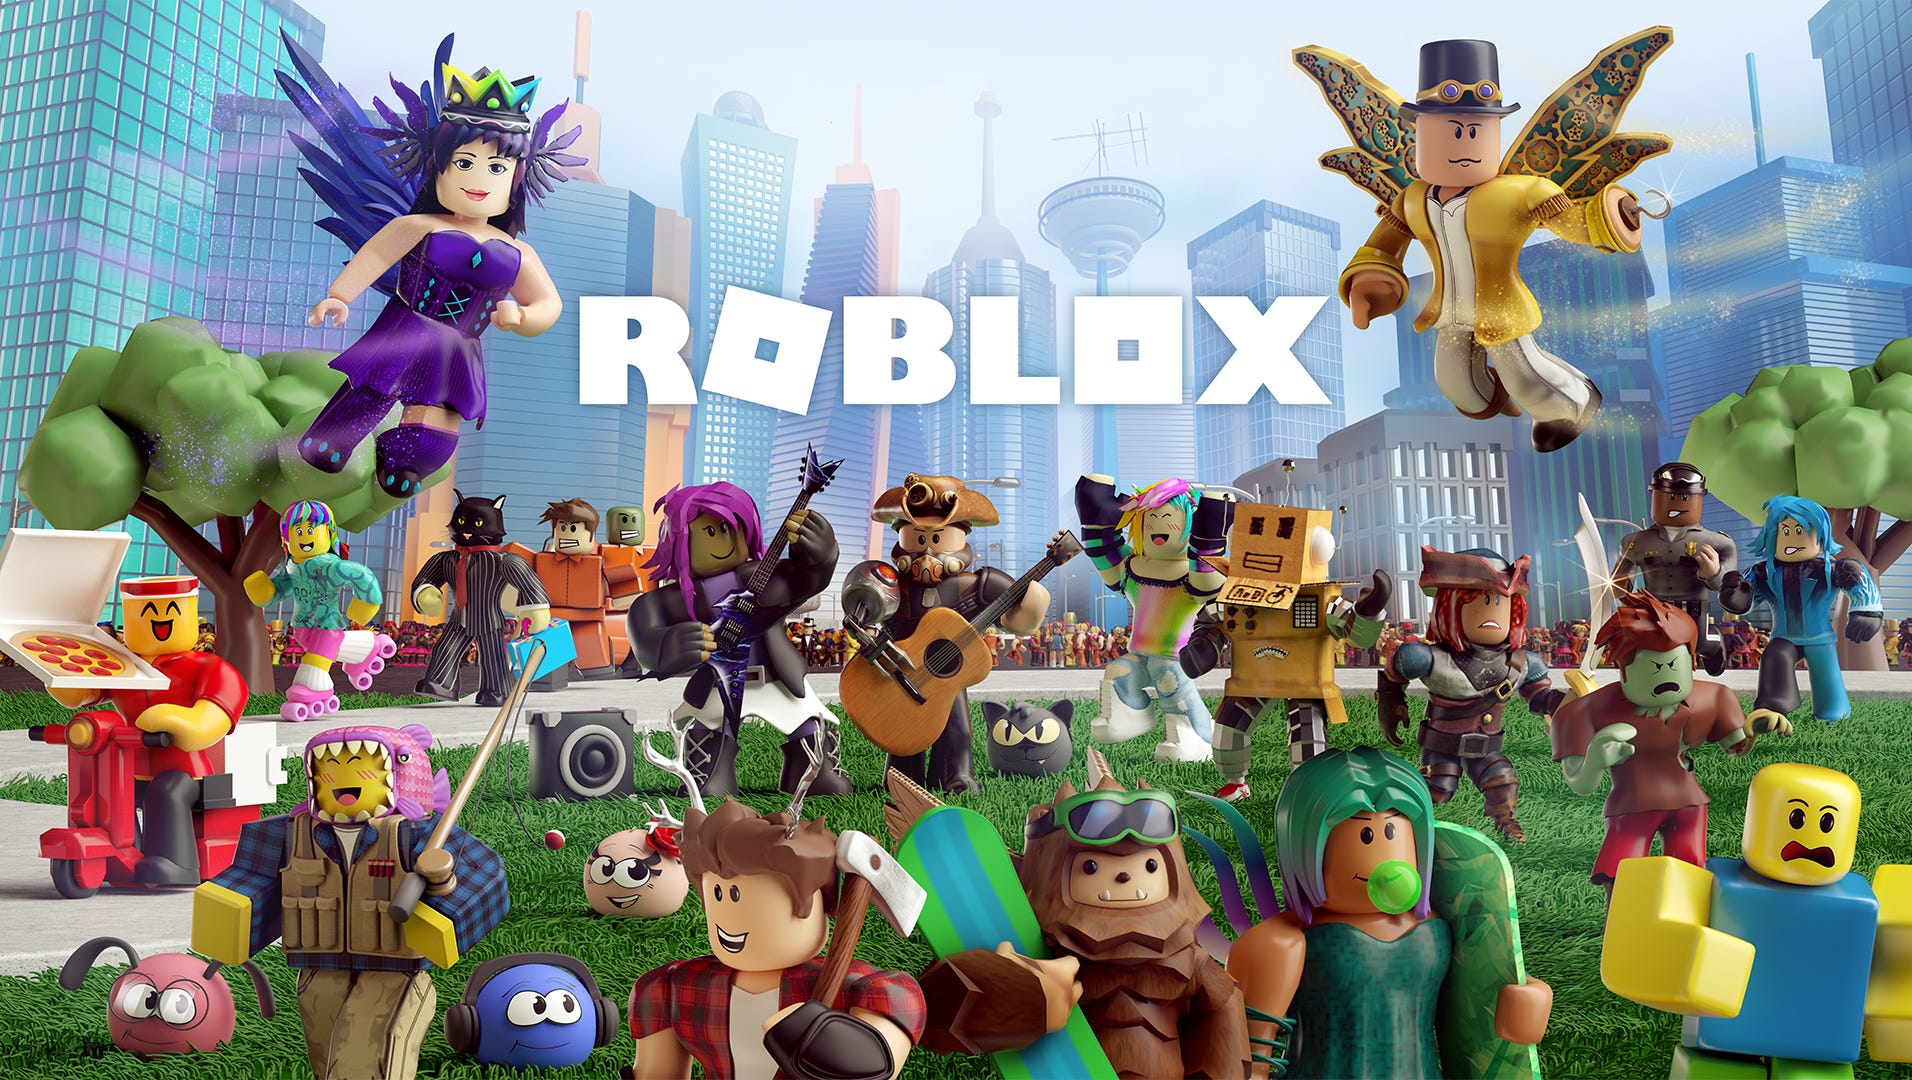 Roblox Kids Game Shows Character Being Sexually Violated Mom Warns - doing awesome tricks in roblox skatepark robloxian